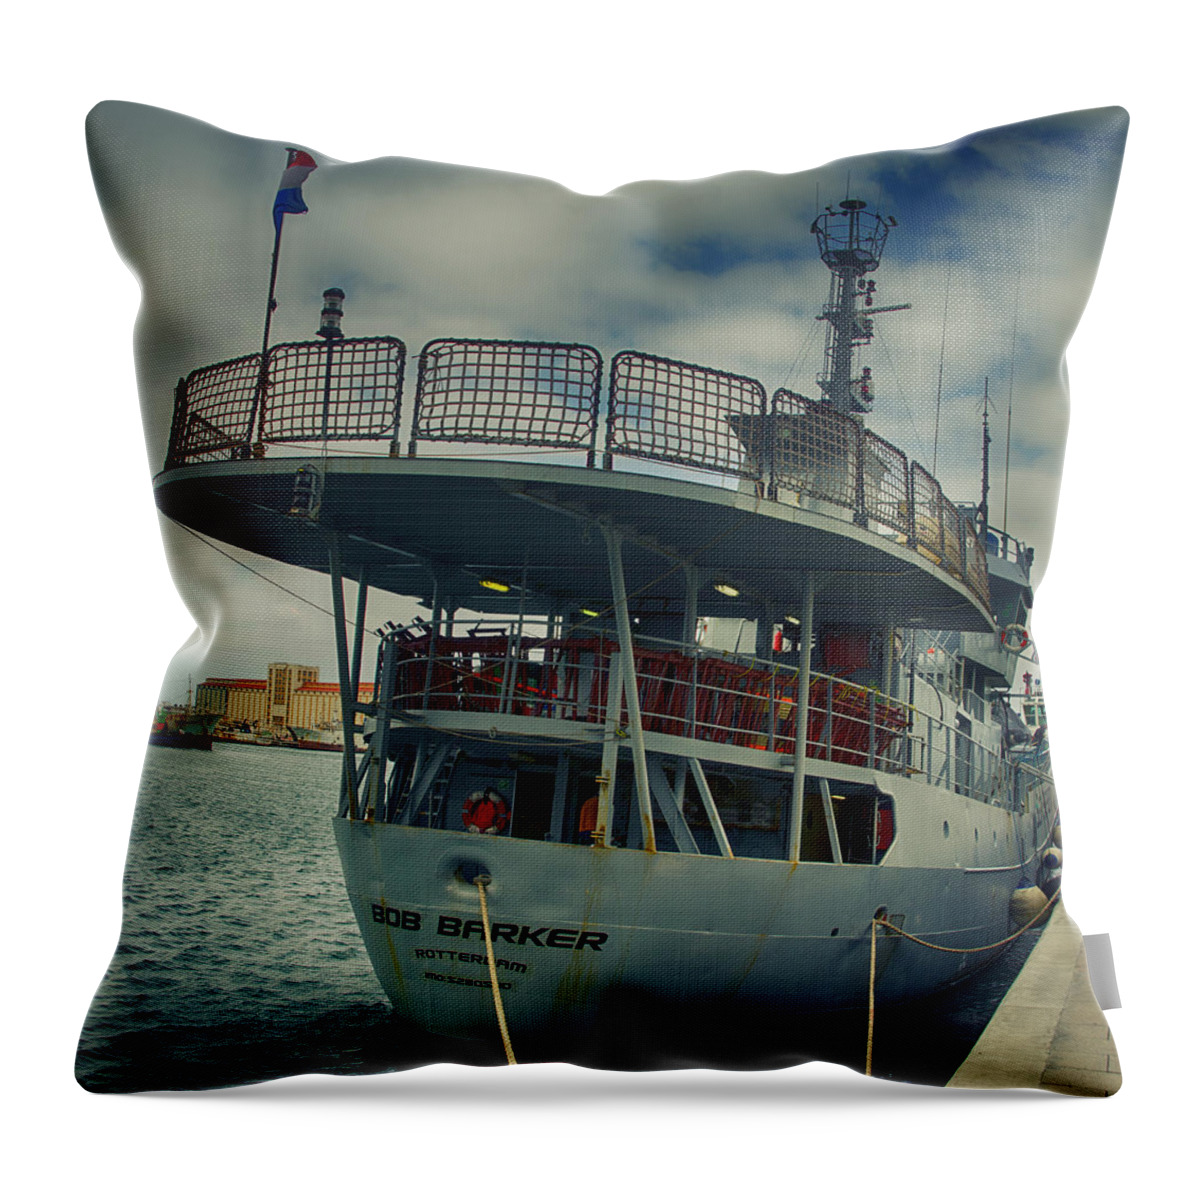 Canary Islands Throw Pillow featuring the photograph Bob Barker by Richard Henne